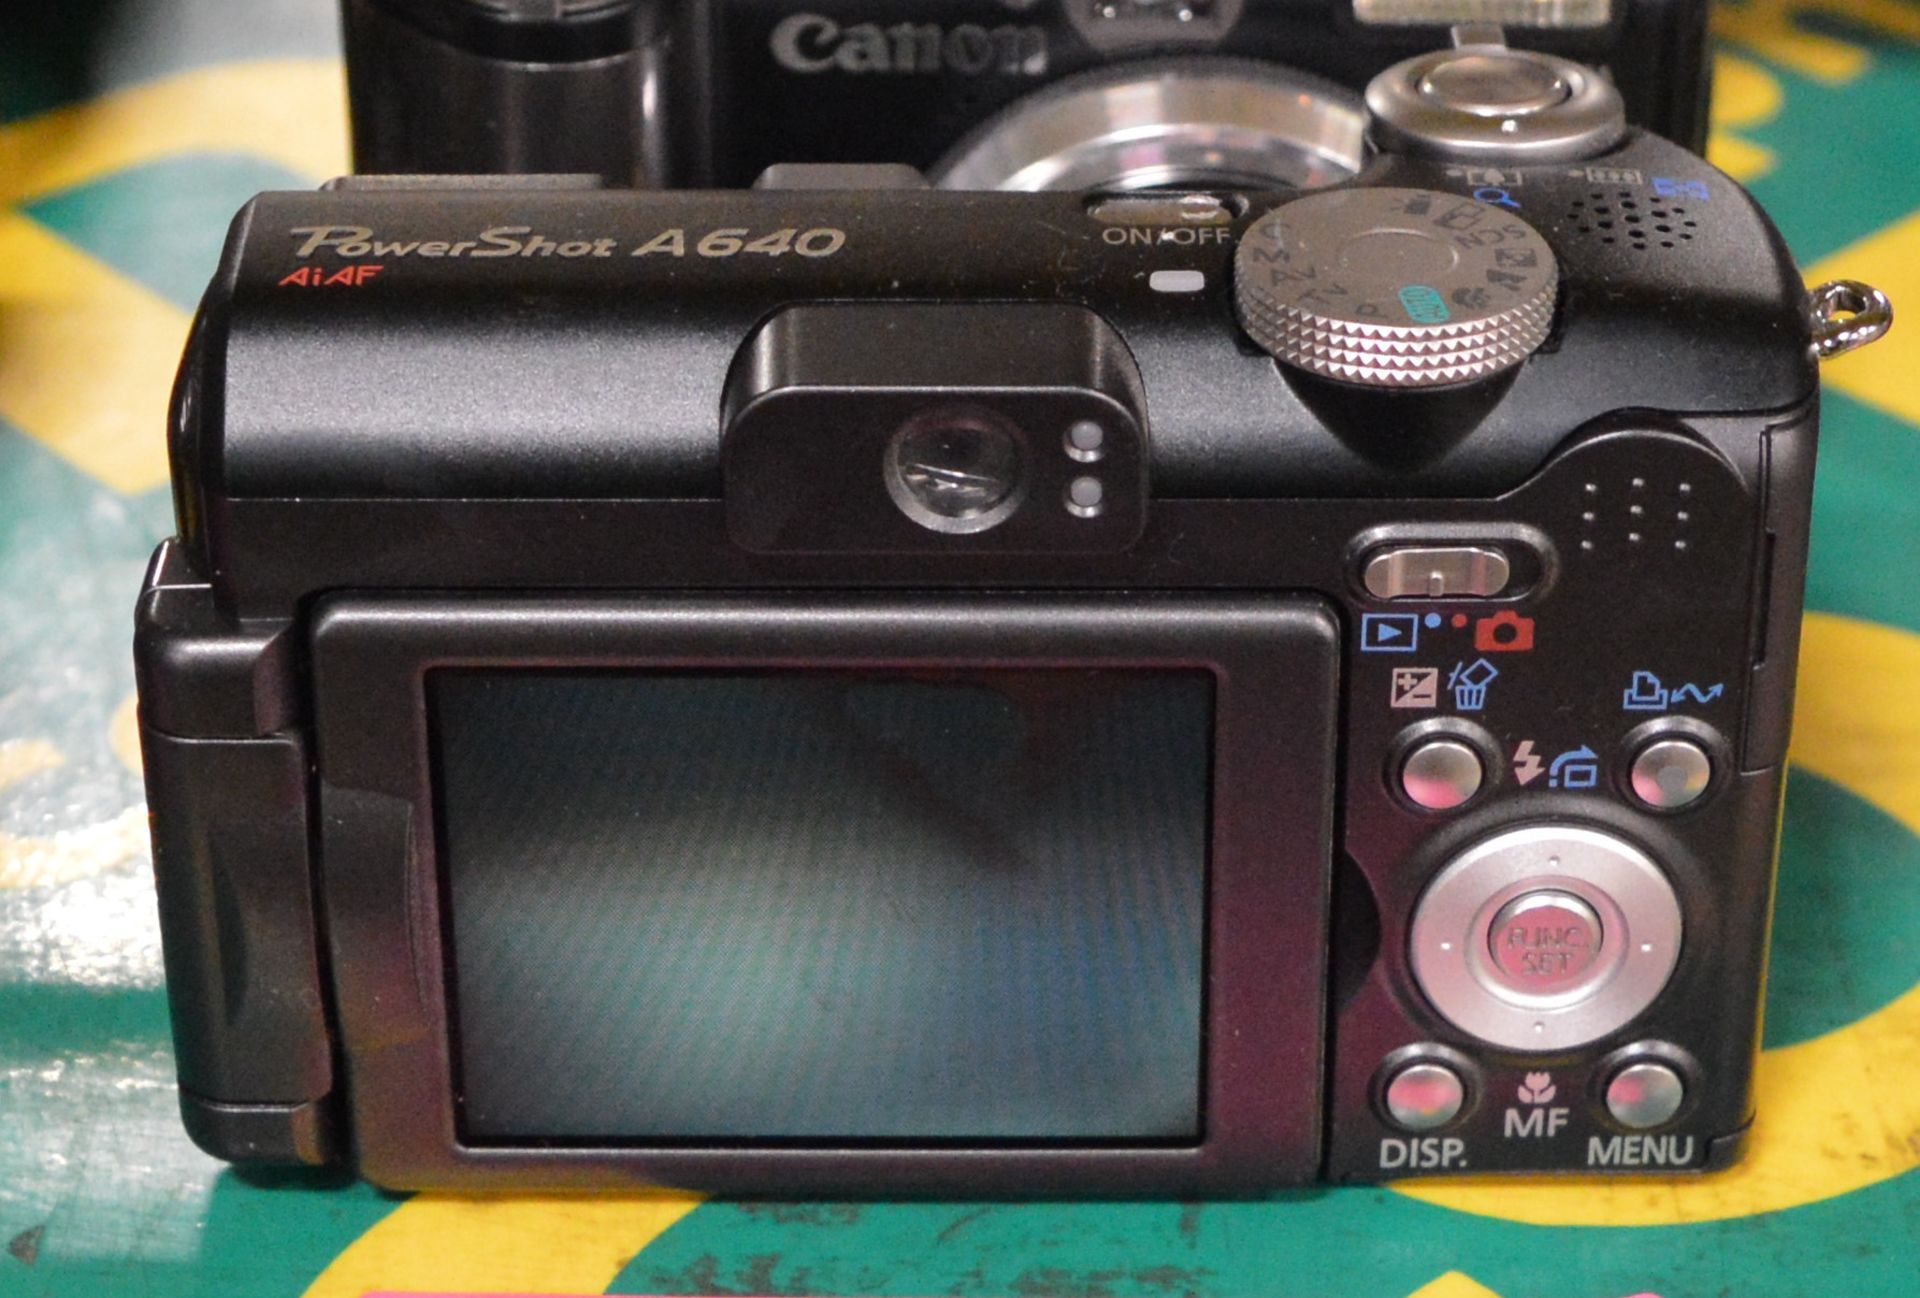 5x Canon PowerShot A640 Digital Cameras - Not Tested. - Image 2 of 2